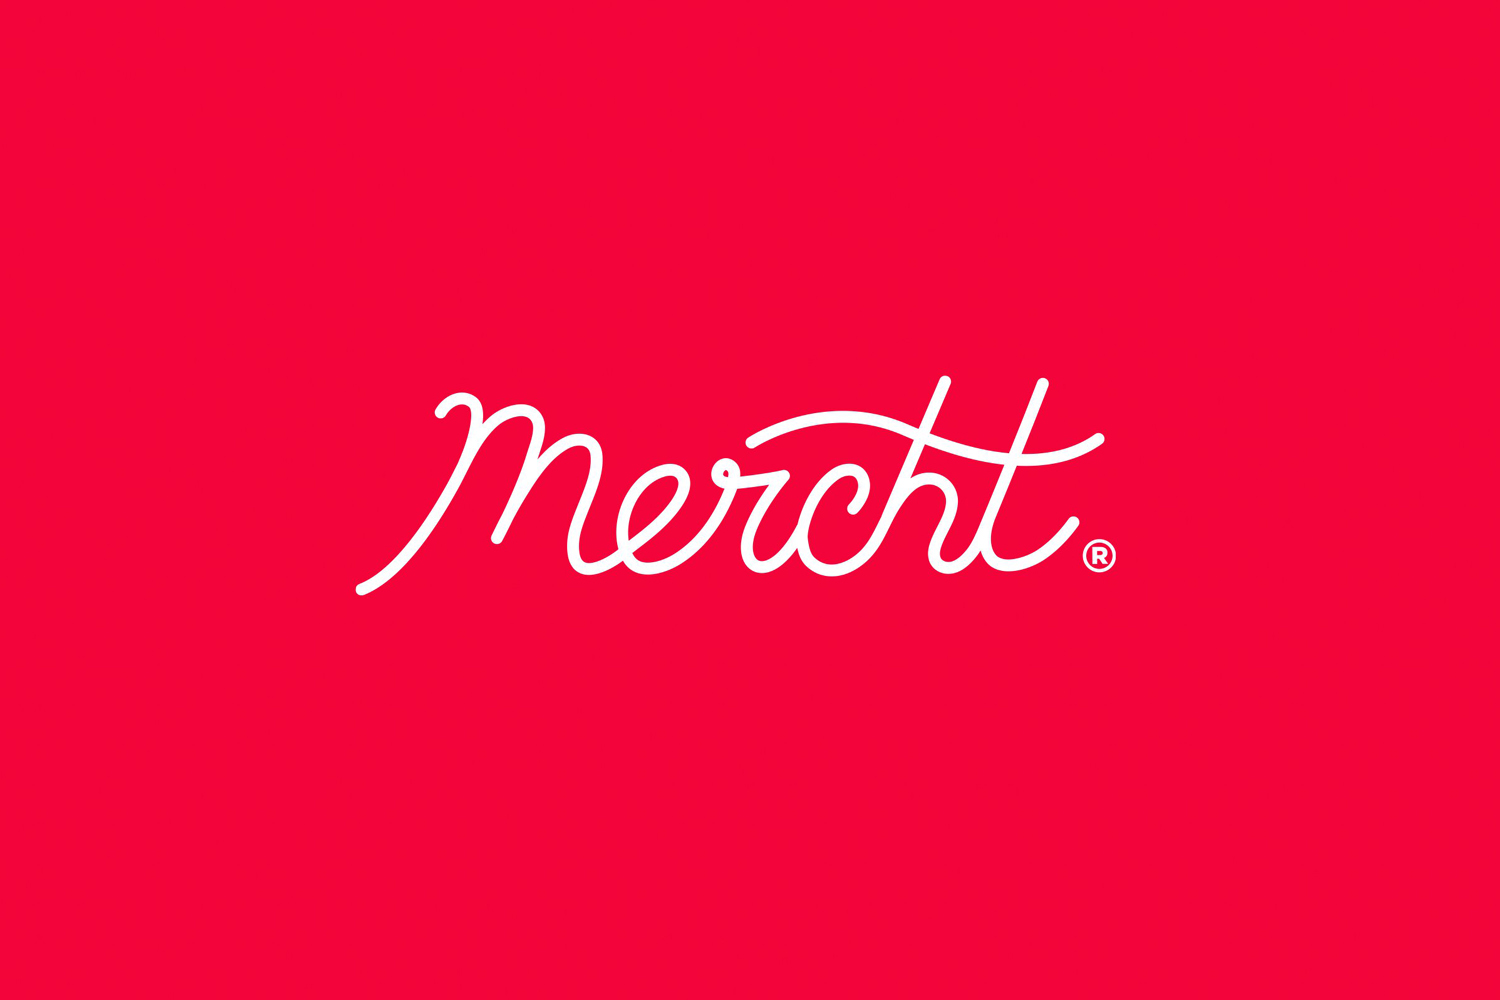 Creative Logotype Gallery & Inspiration: Mercht by Robot Food, United Kingdom